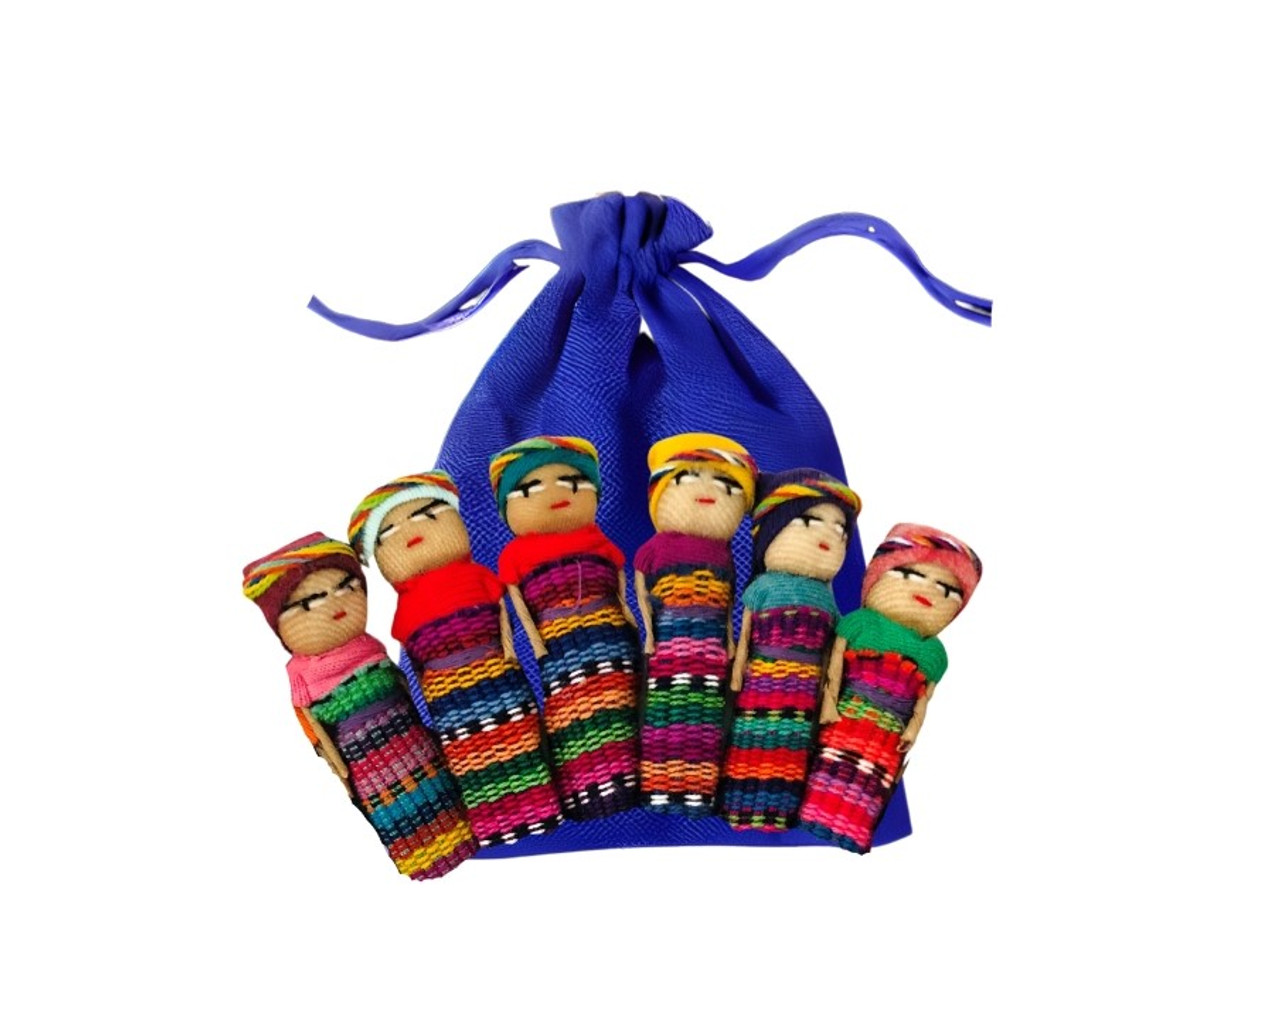 Worry Dolls 2", Set of 6 Fun Festive Decorative Figurines, Best Friends, Party Favors, Hope for Peace 